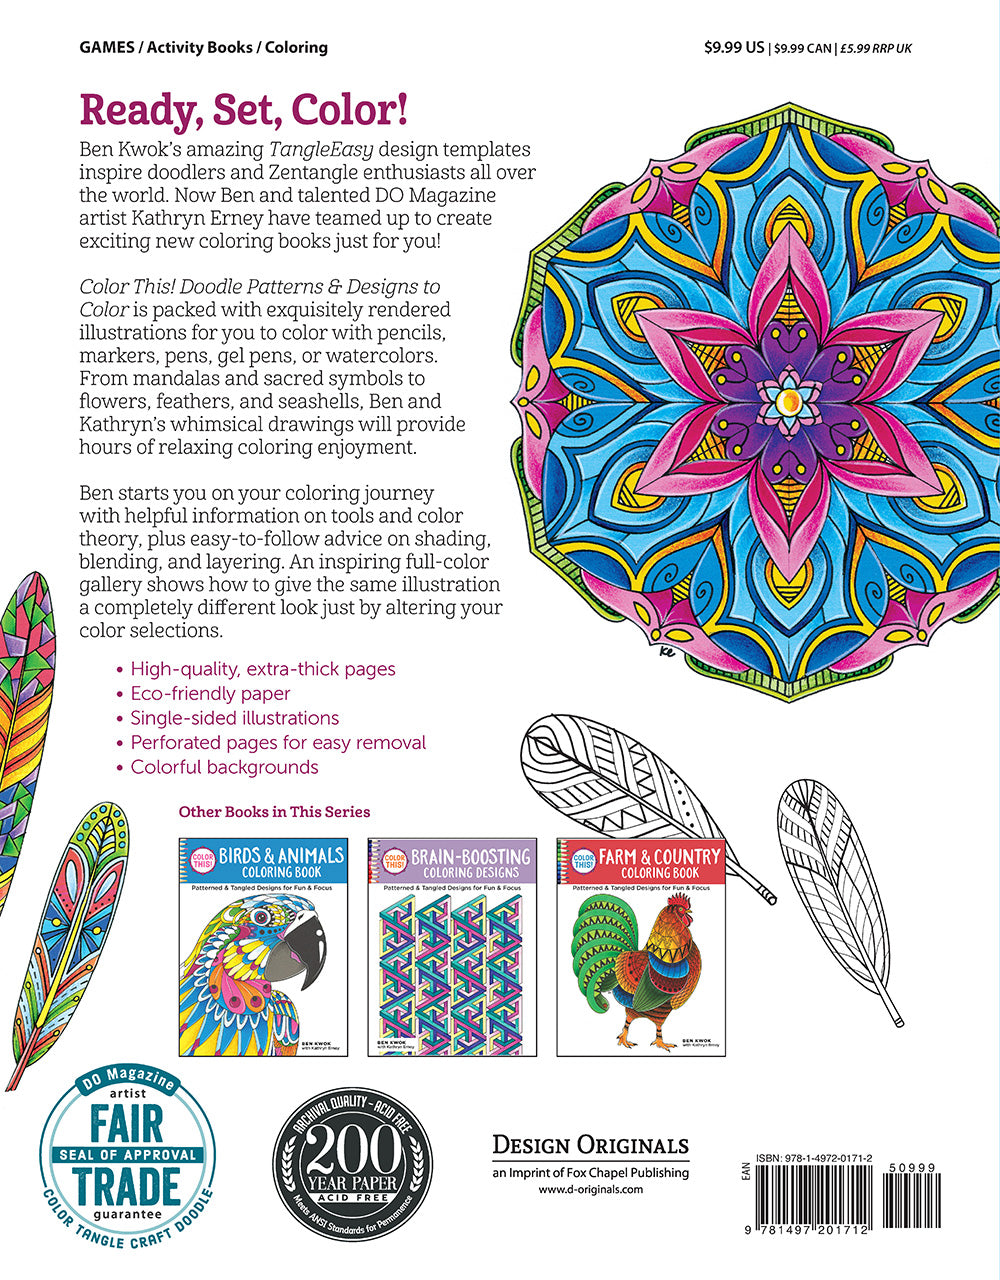 Color This! Doodle Patterns & Designs to Color